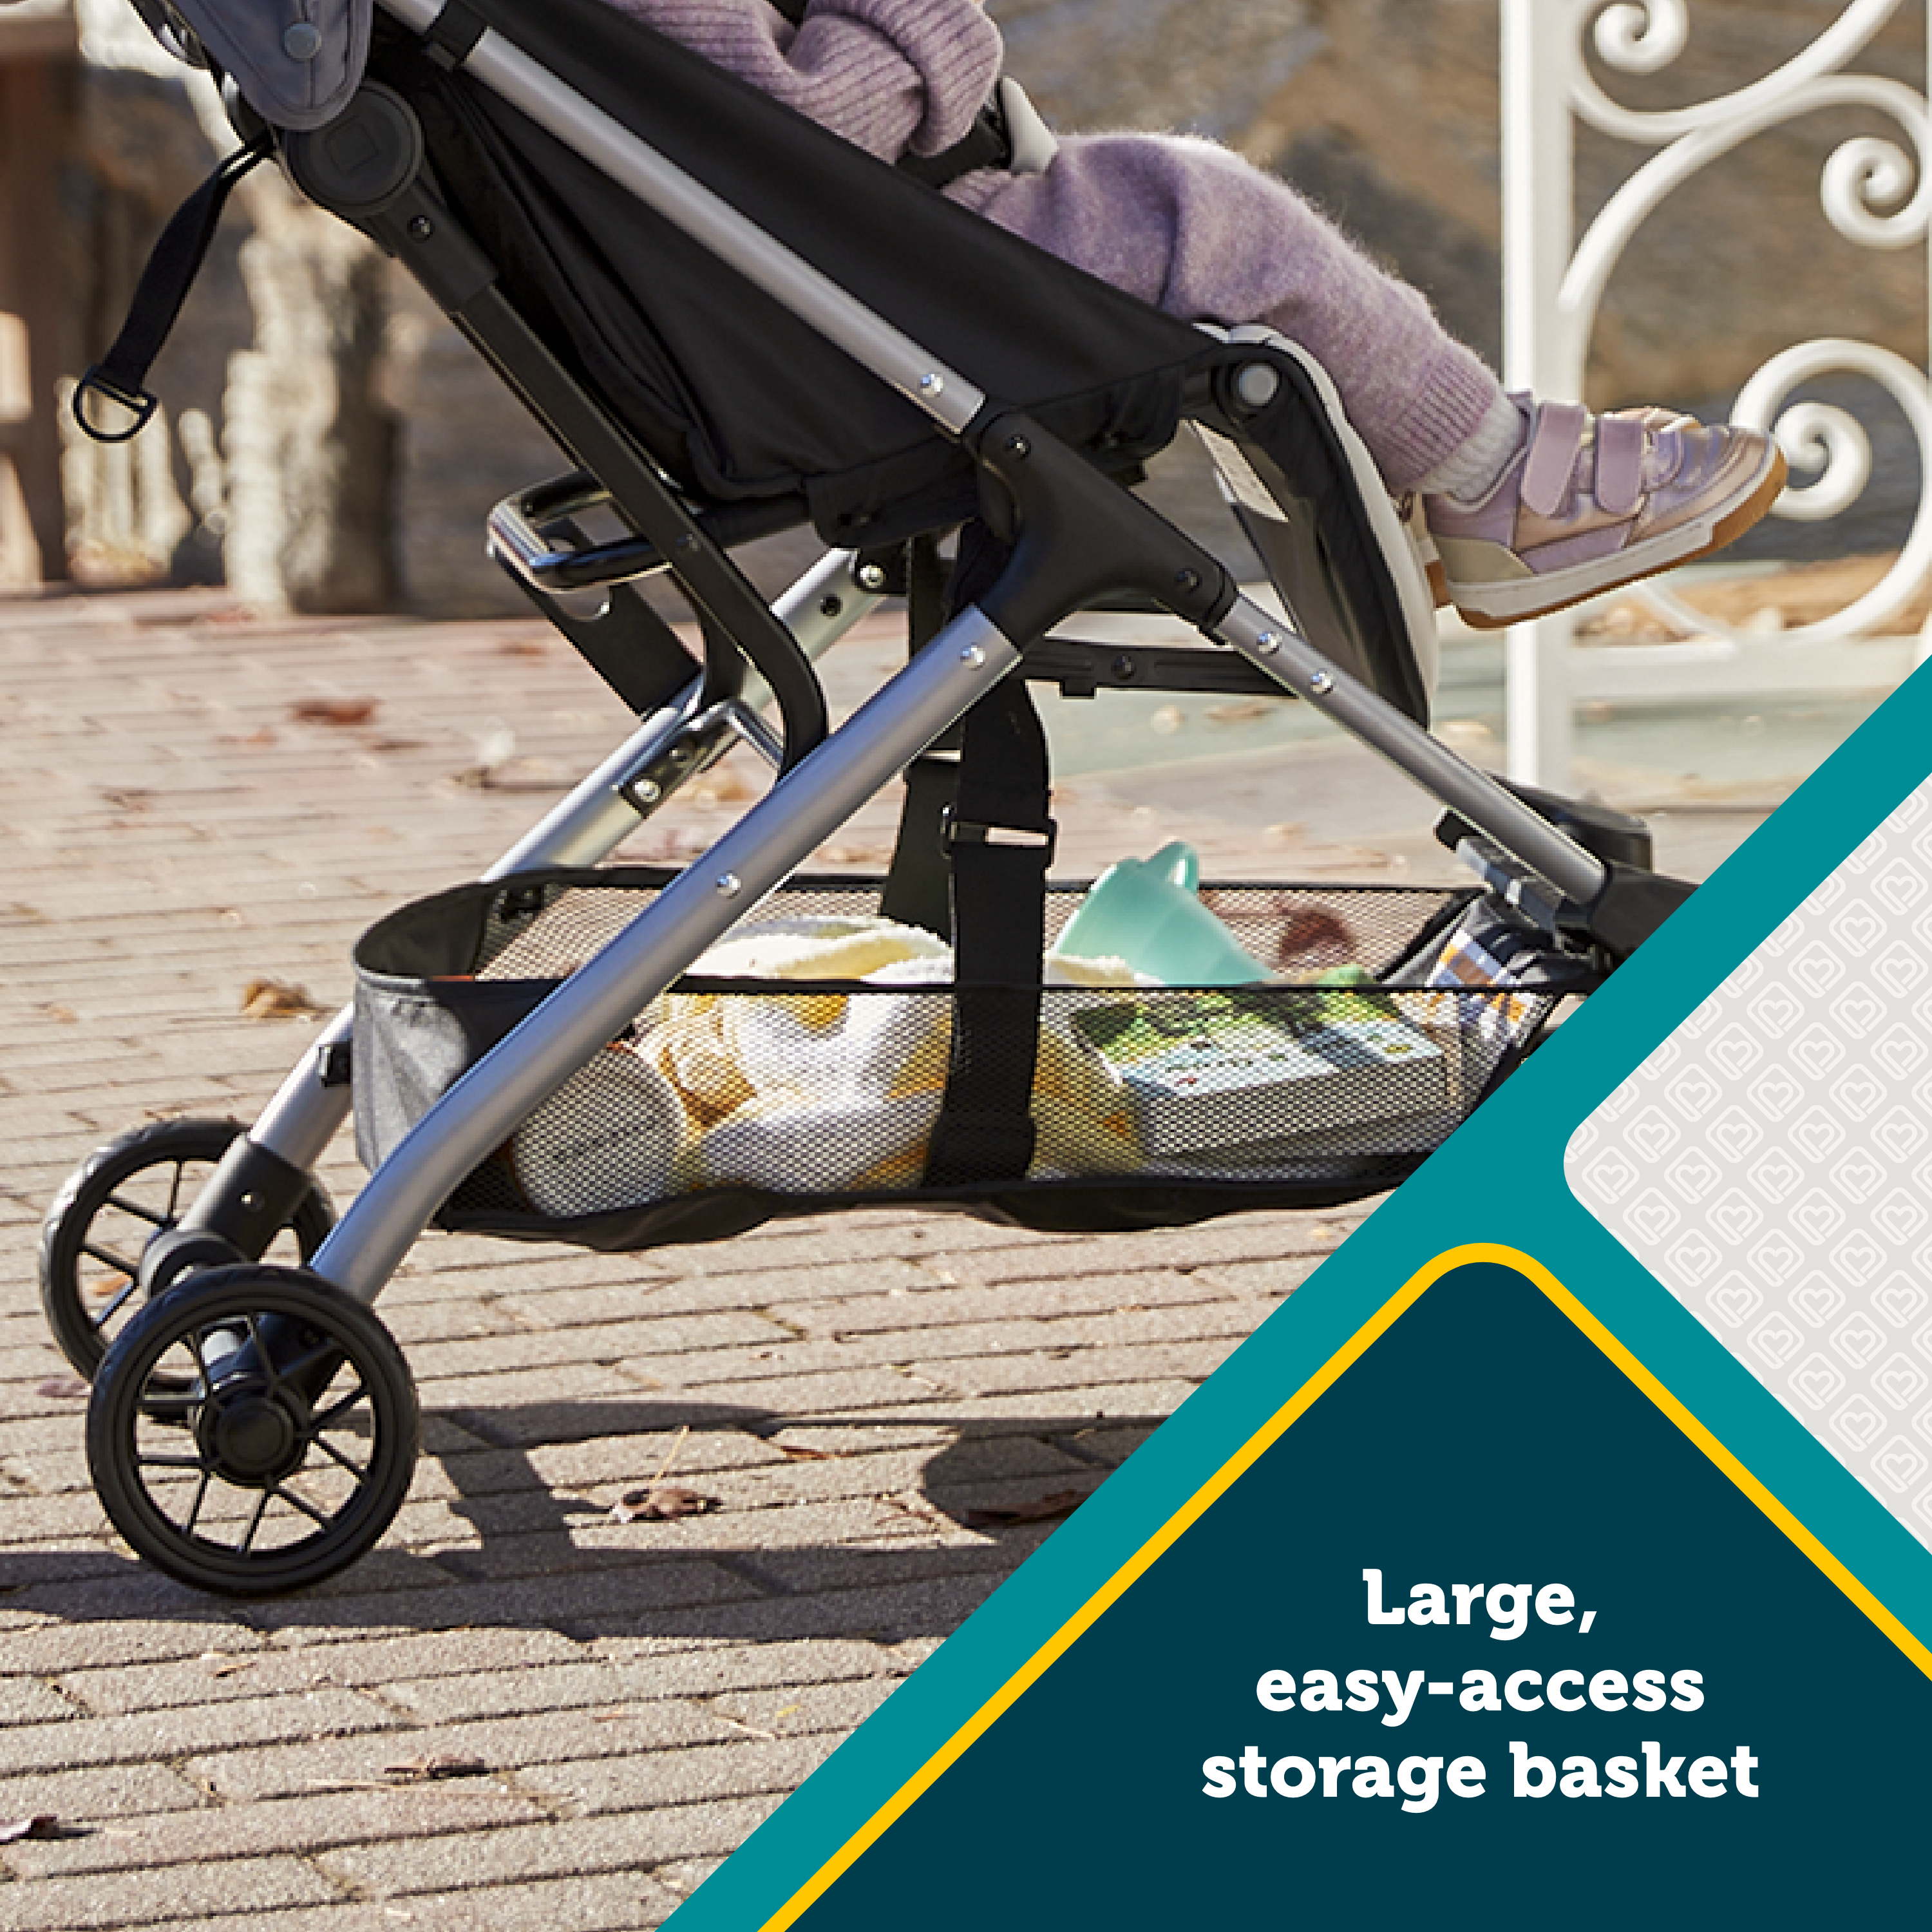 Easy-Fold Compact Stroller - large, easy-access storage basket